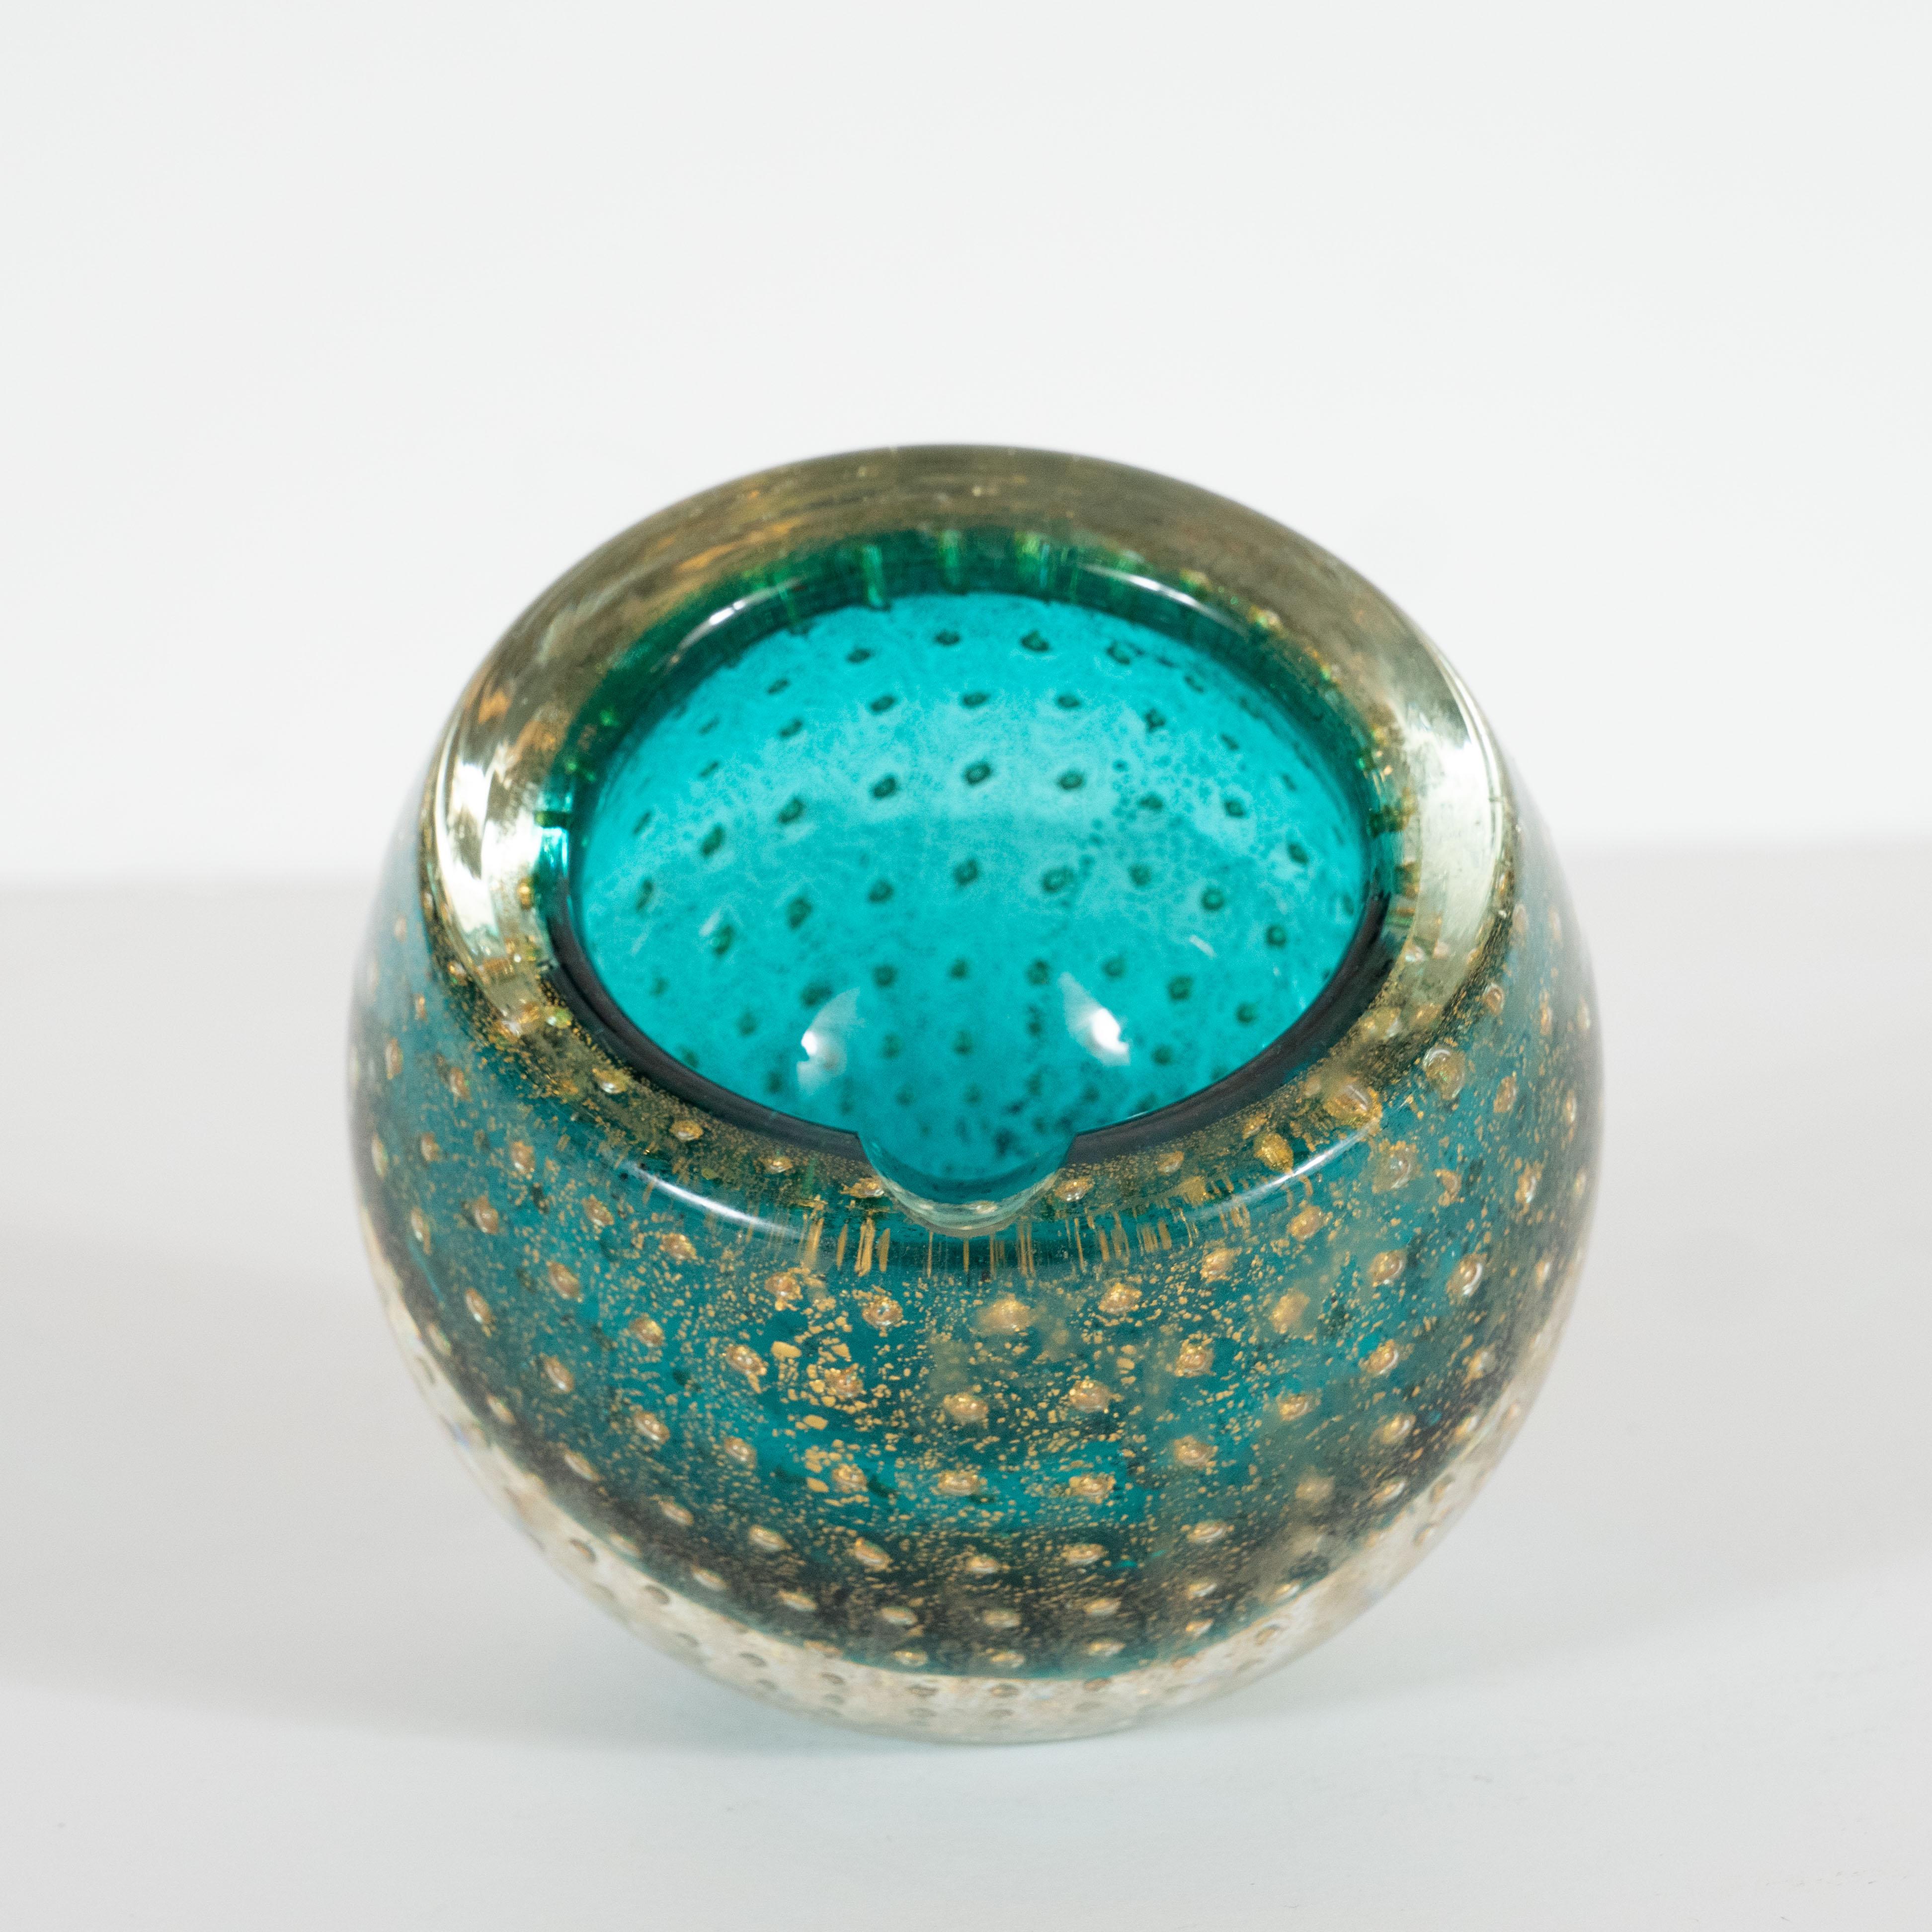 This elegant decorative bowl or ashtray was handblown in Murano, Italy- the island off the coast of Venice renowned for its superlative glass production, circa 1960. It features a spherical body with a circular mouth cut a bias with a translucent